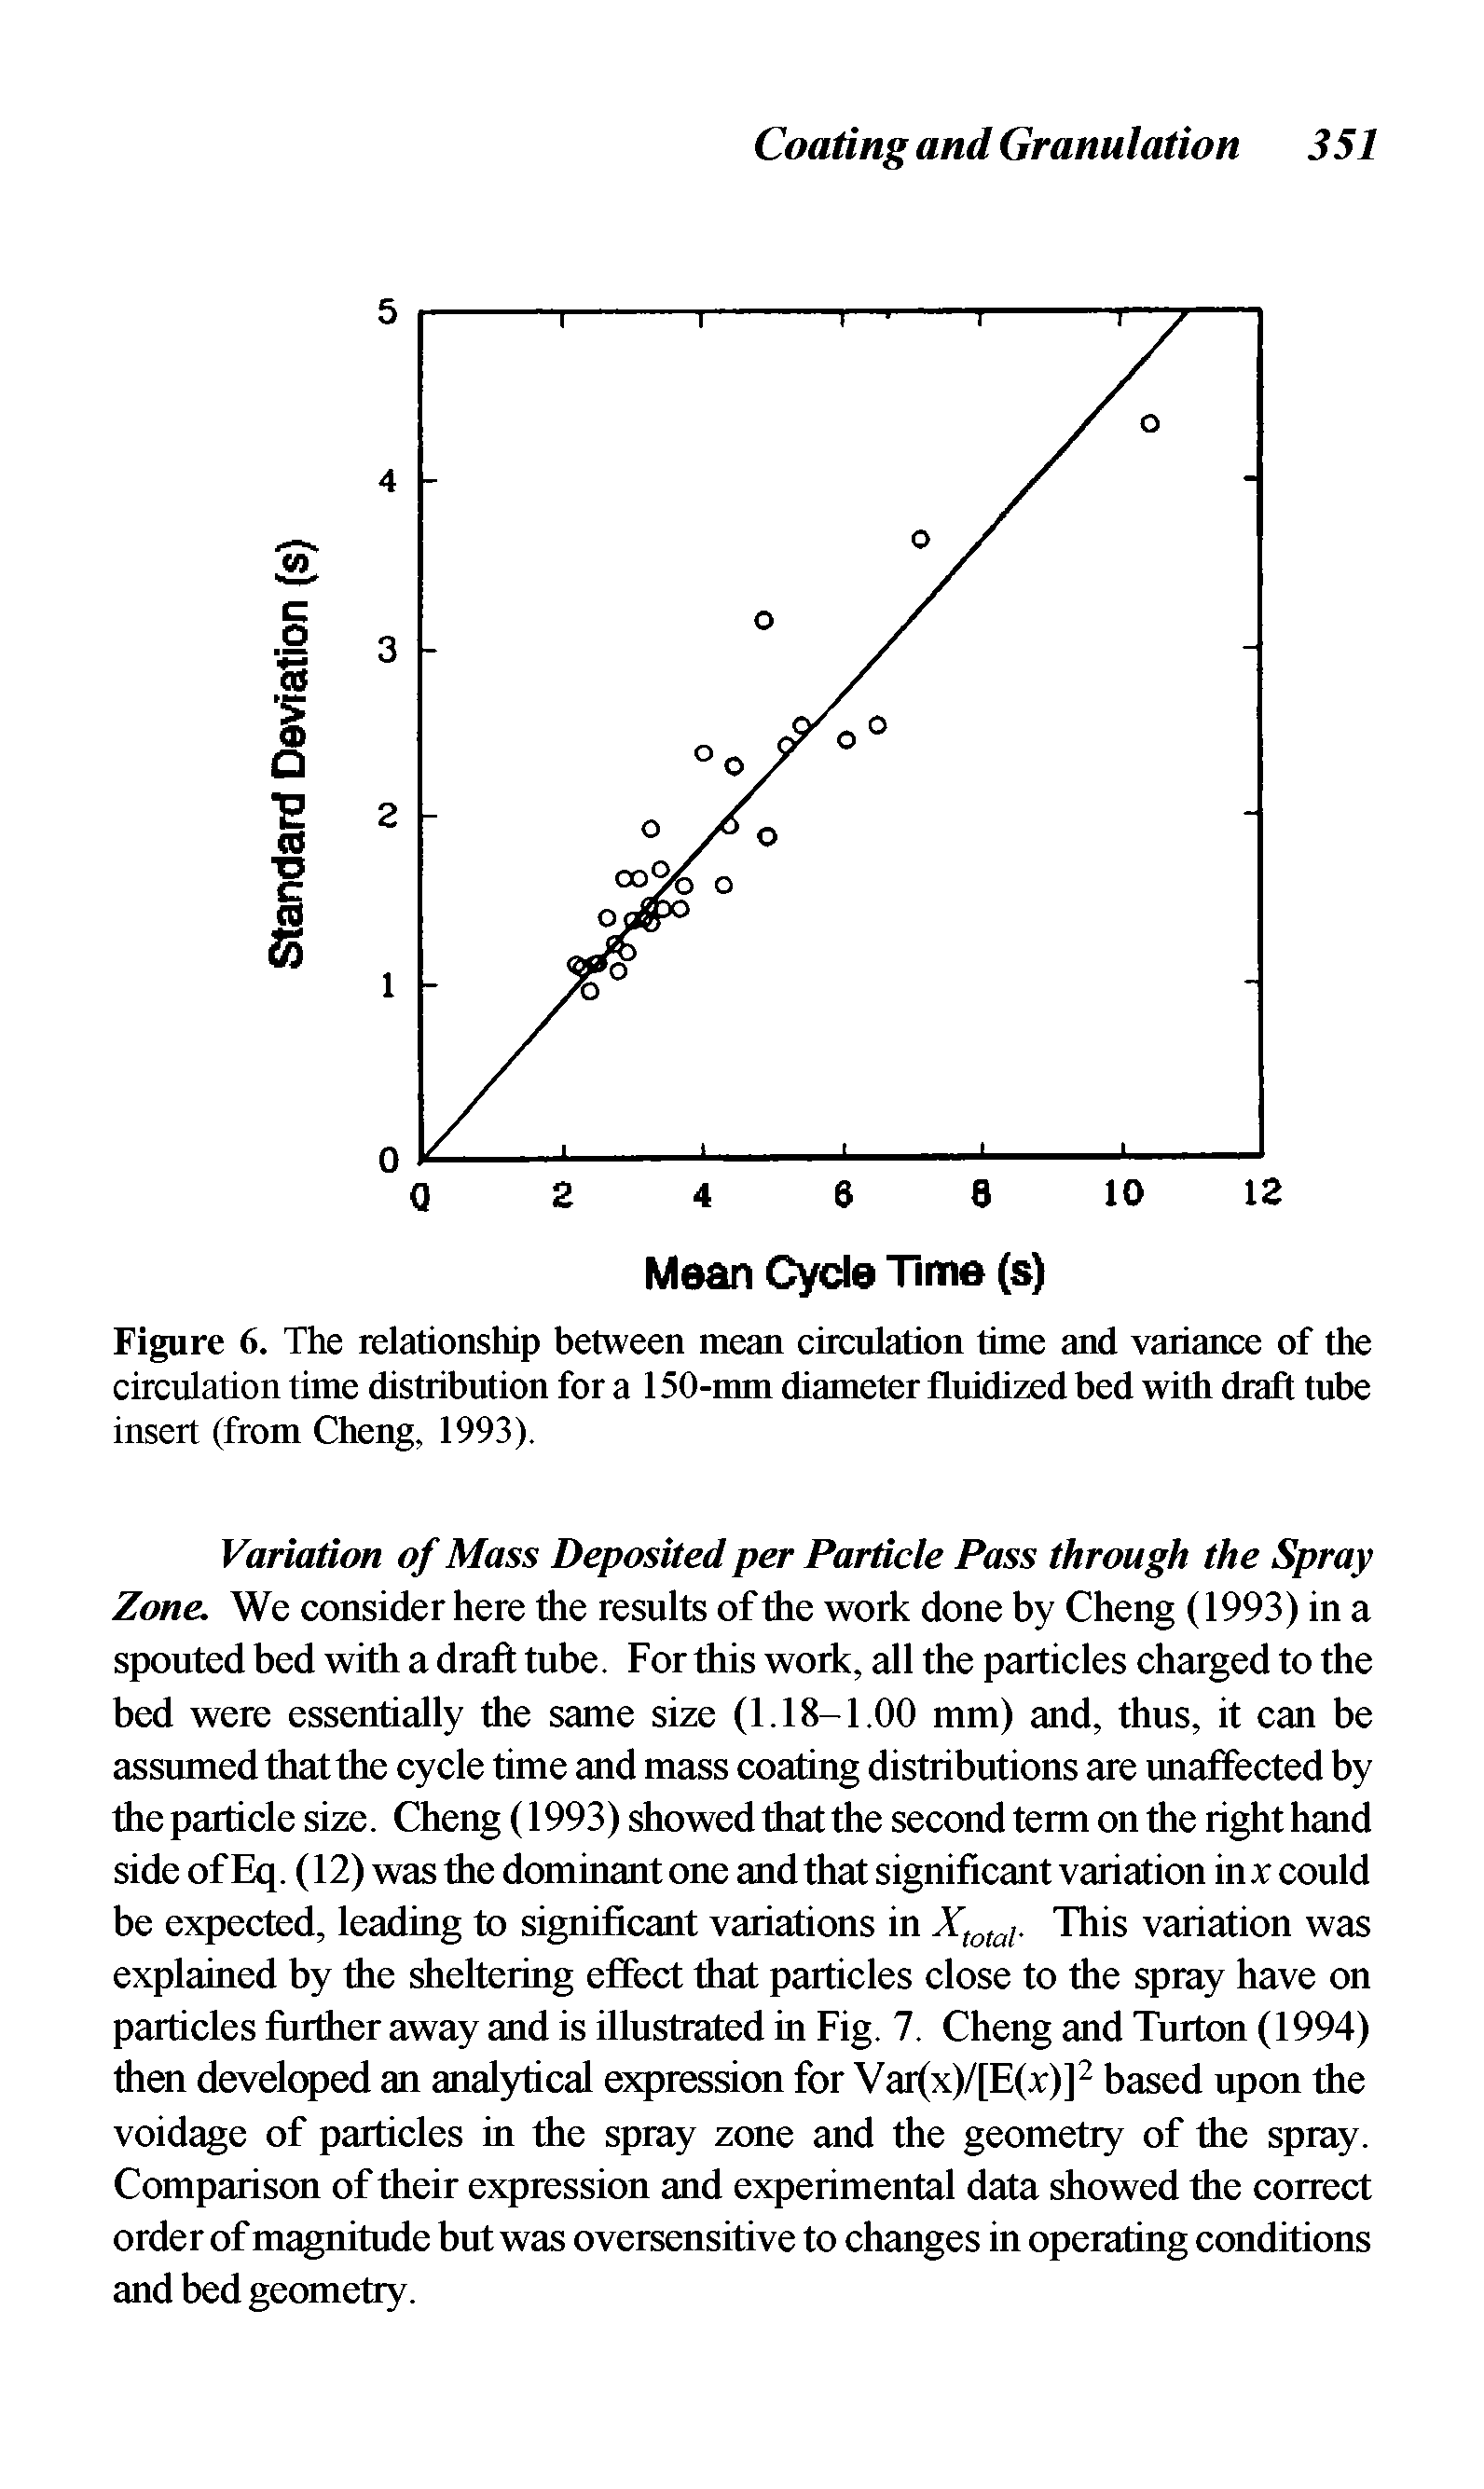 Figure 6. The relationship between mean circulation time and variance of the circulation time distribution for a 150-mm diameter fluidized bed with draft tube insert (from Cheng, 1993).